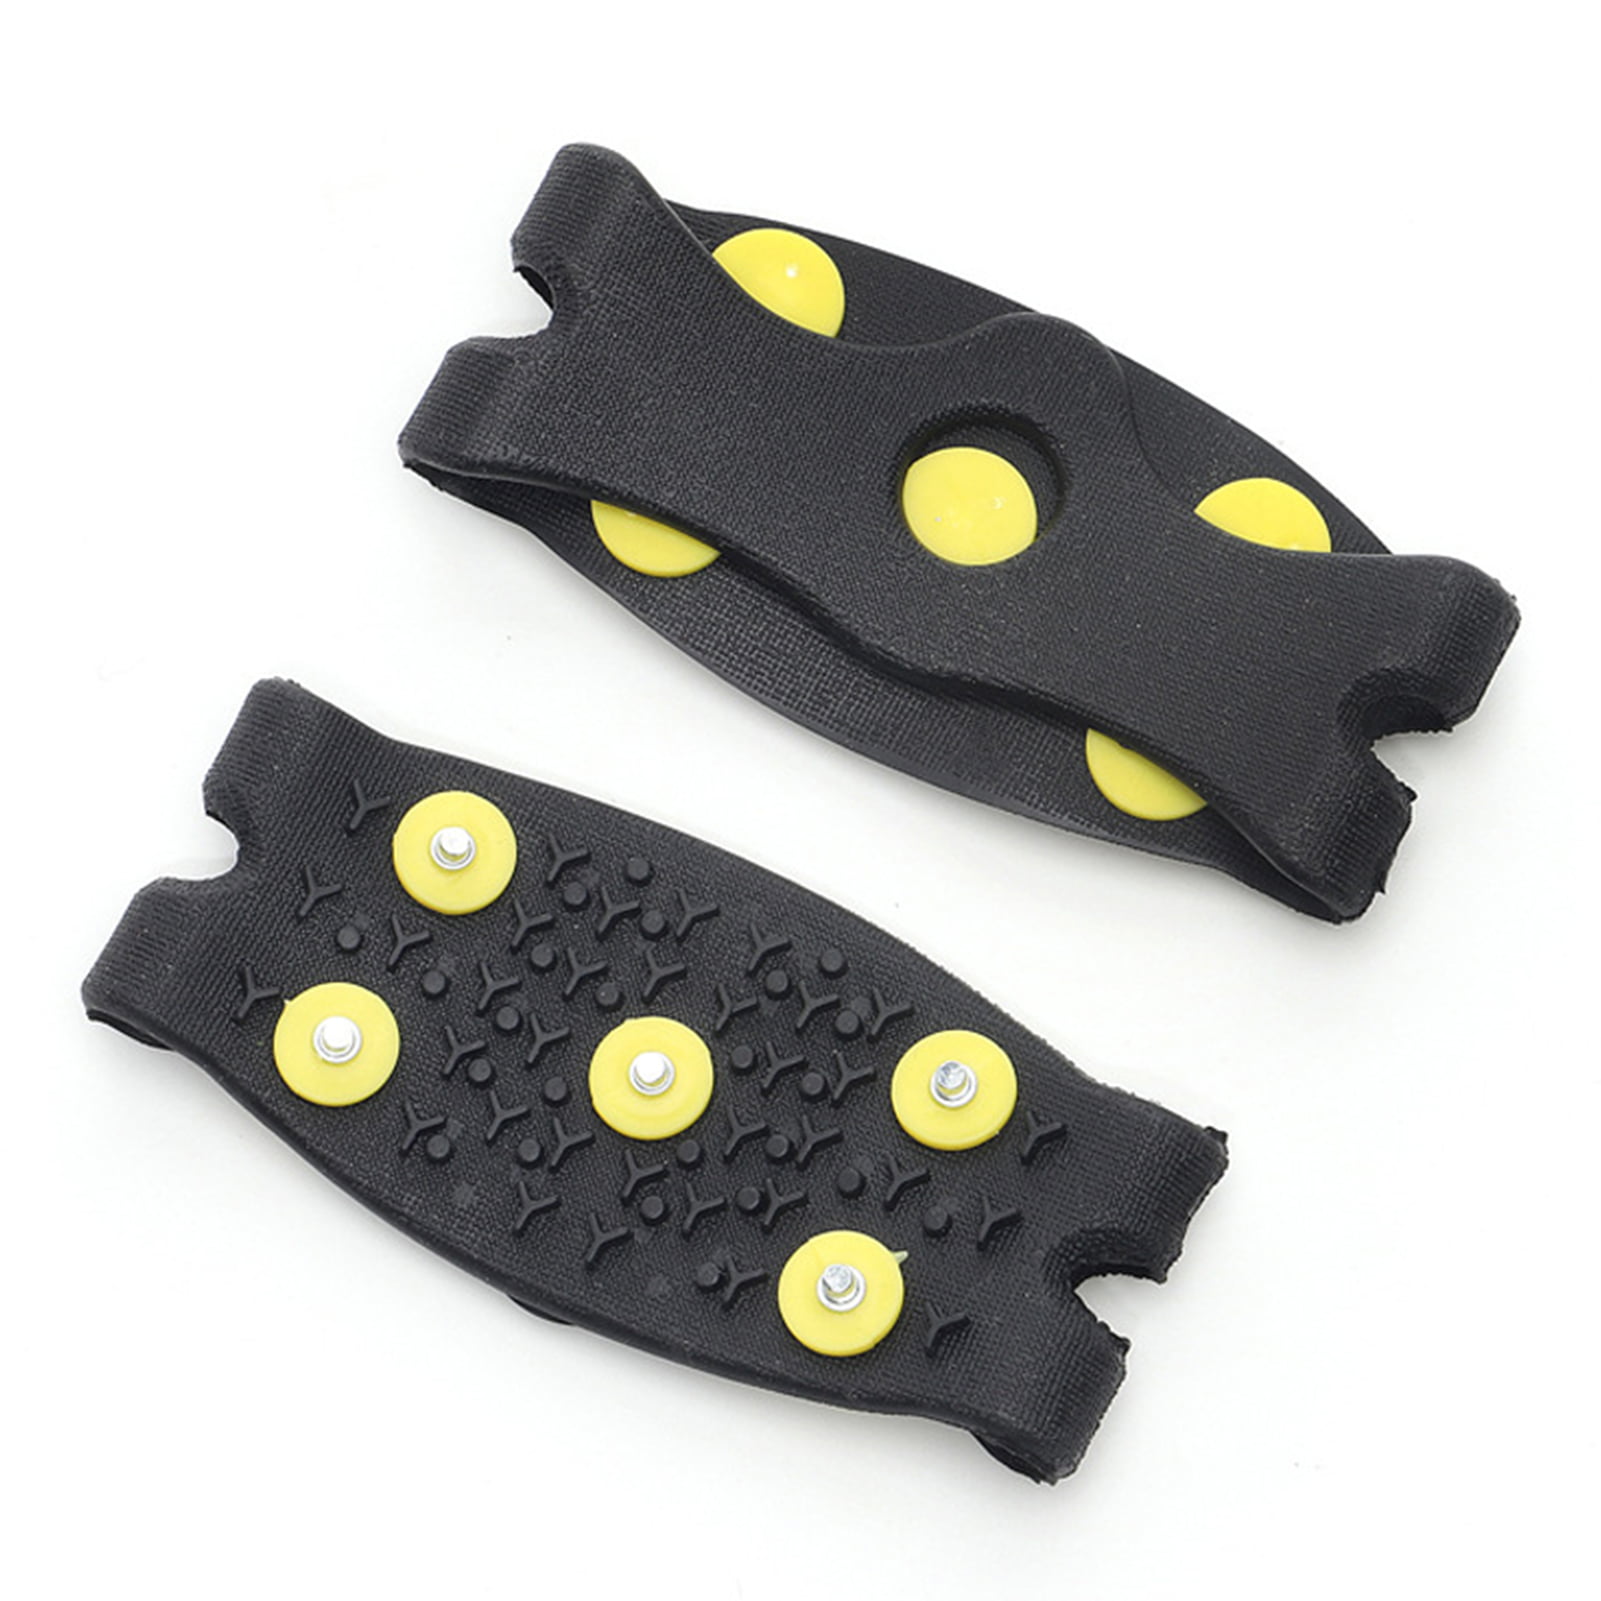 Anti Slip Crampon Snow Ice Climbing Spikes Gripper Cleats 5-Stud Shoes Cover 